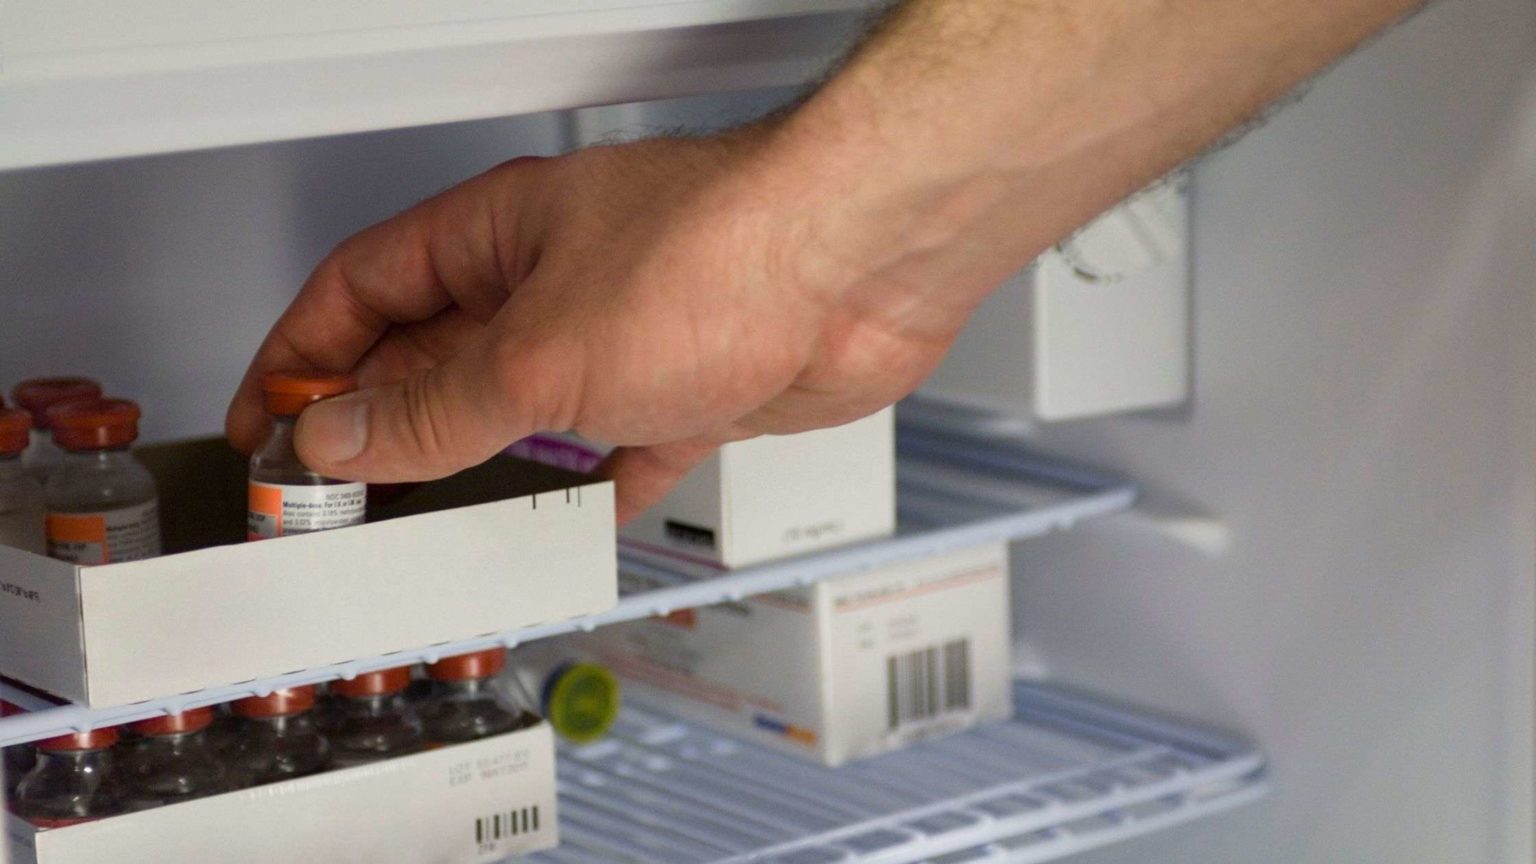 How To Store Insulin Without Refrigeration